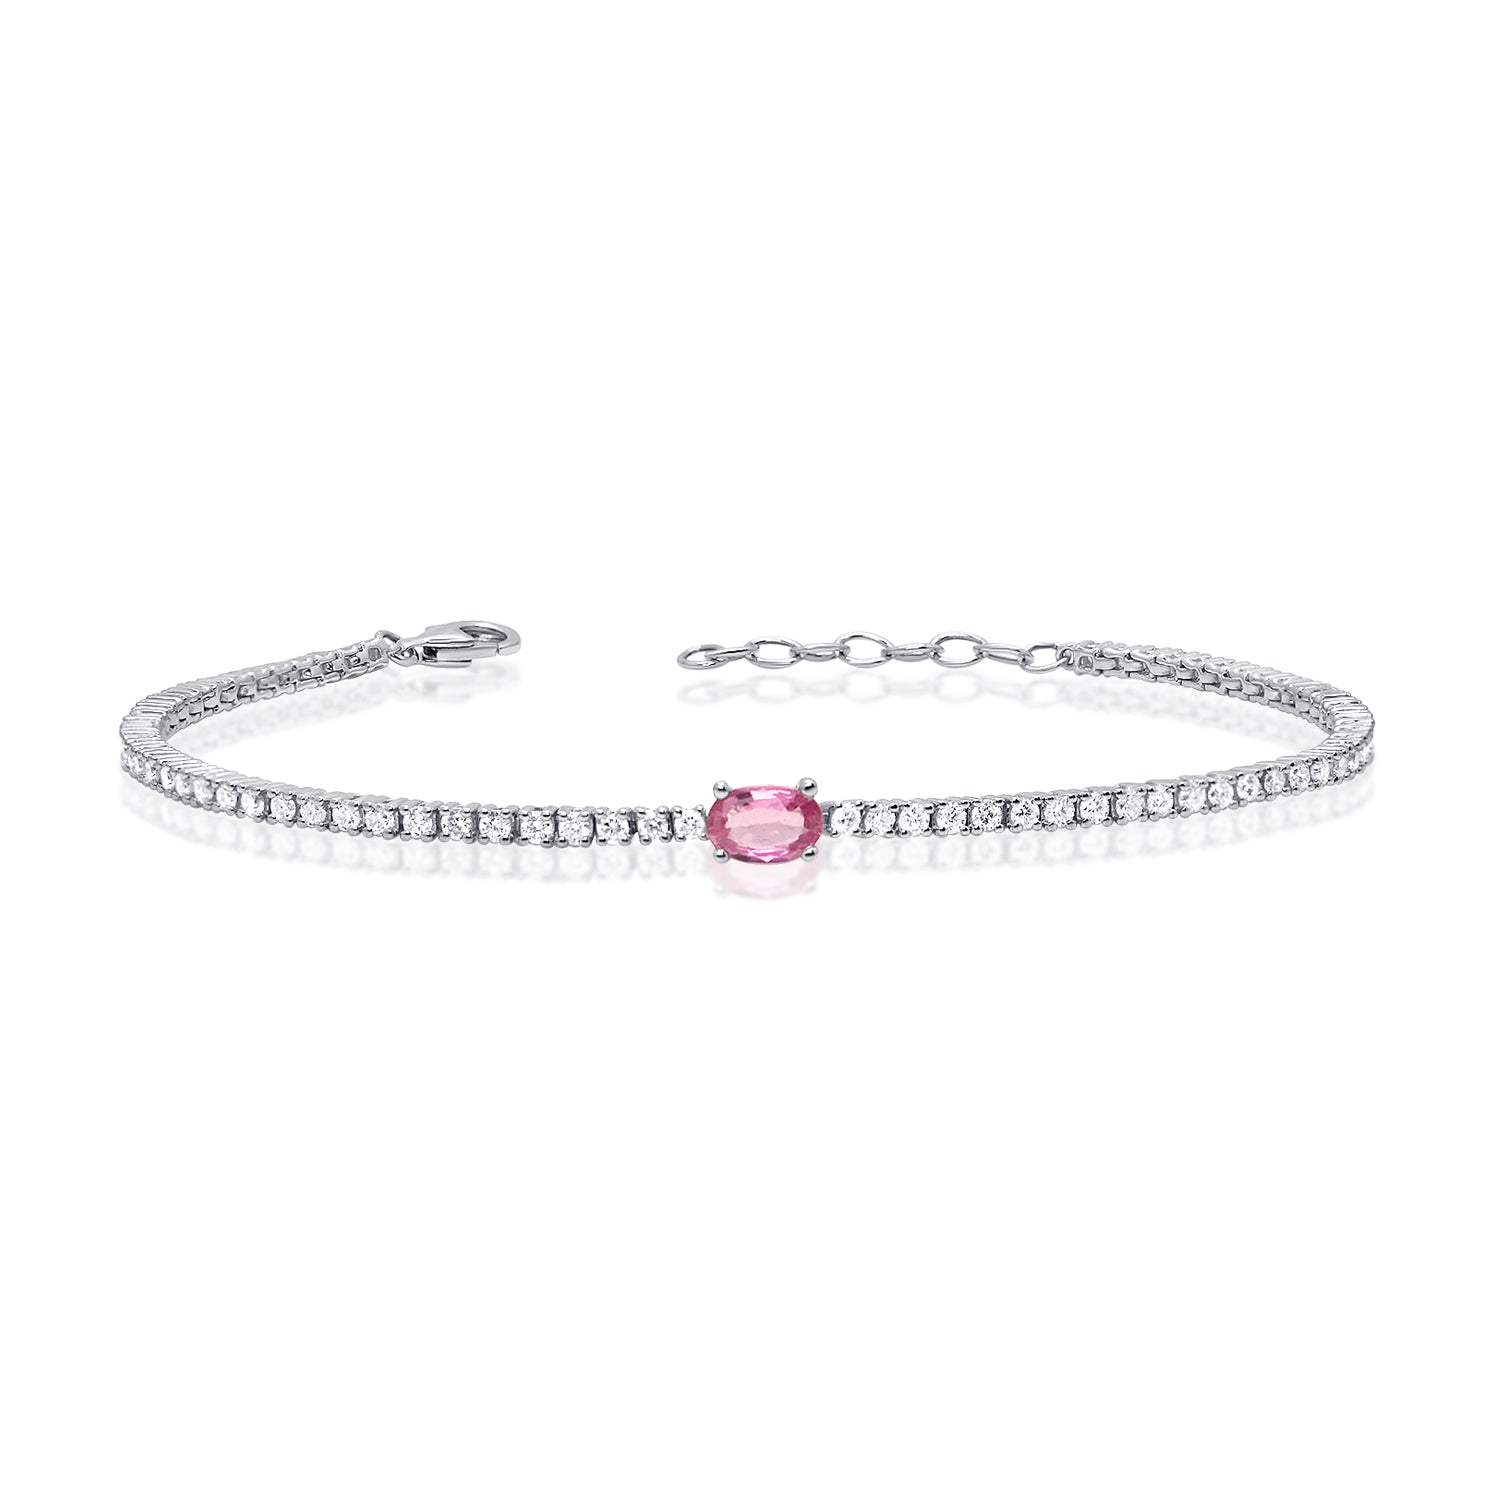 Four Prong Tennis Bracelet With Oval Gemstone Center